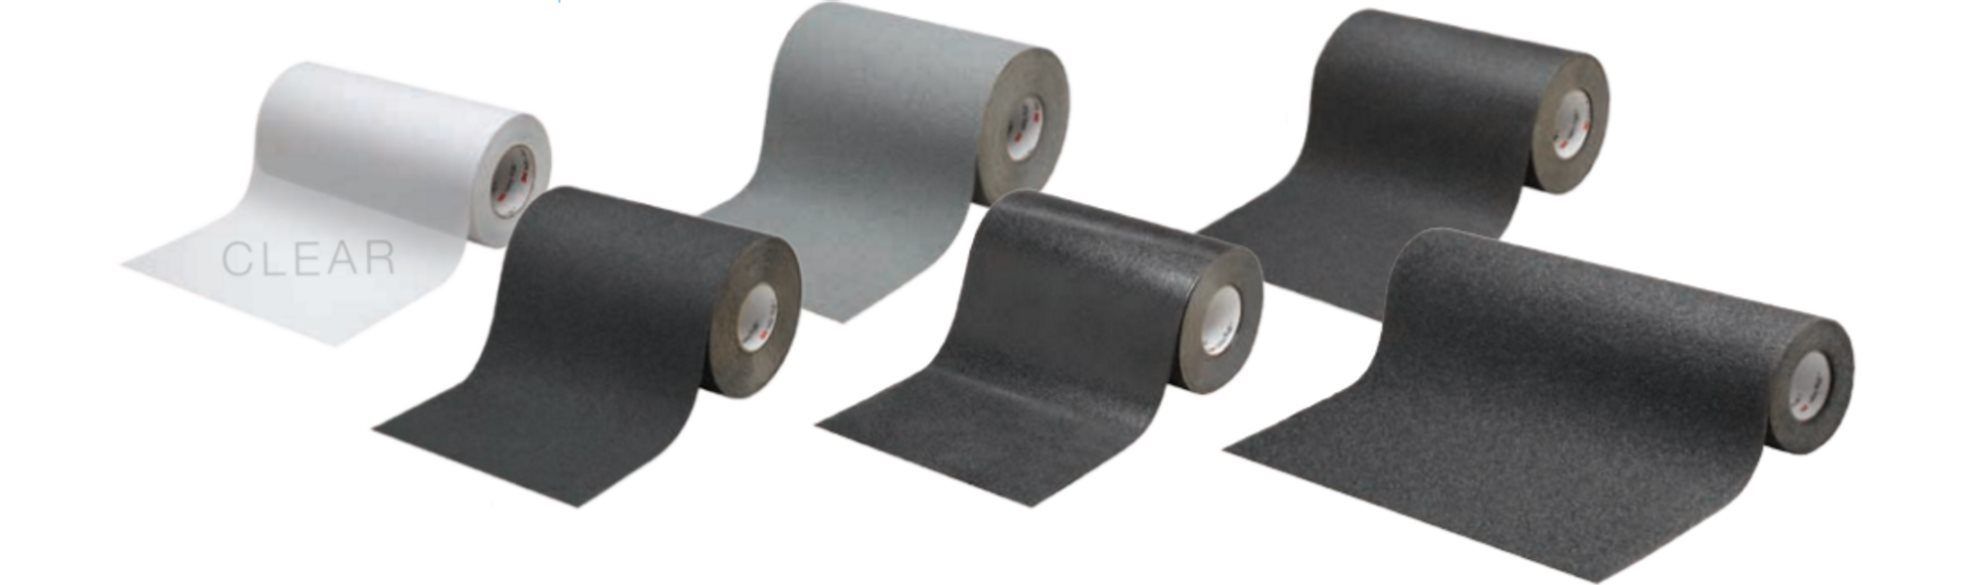 levering aan huis schokkend Veilig Buy Non-Slip Rubber Sheets - Anti-Slip & Anti-Skid Products from Frank Lowe